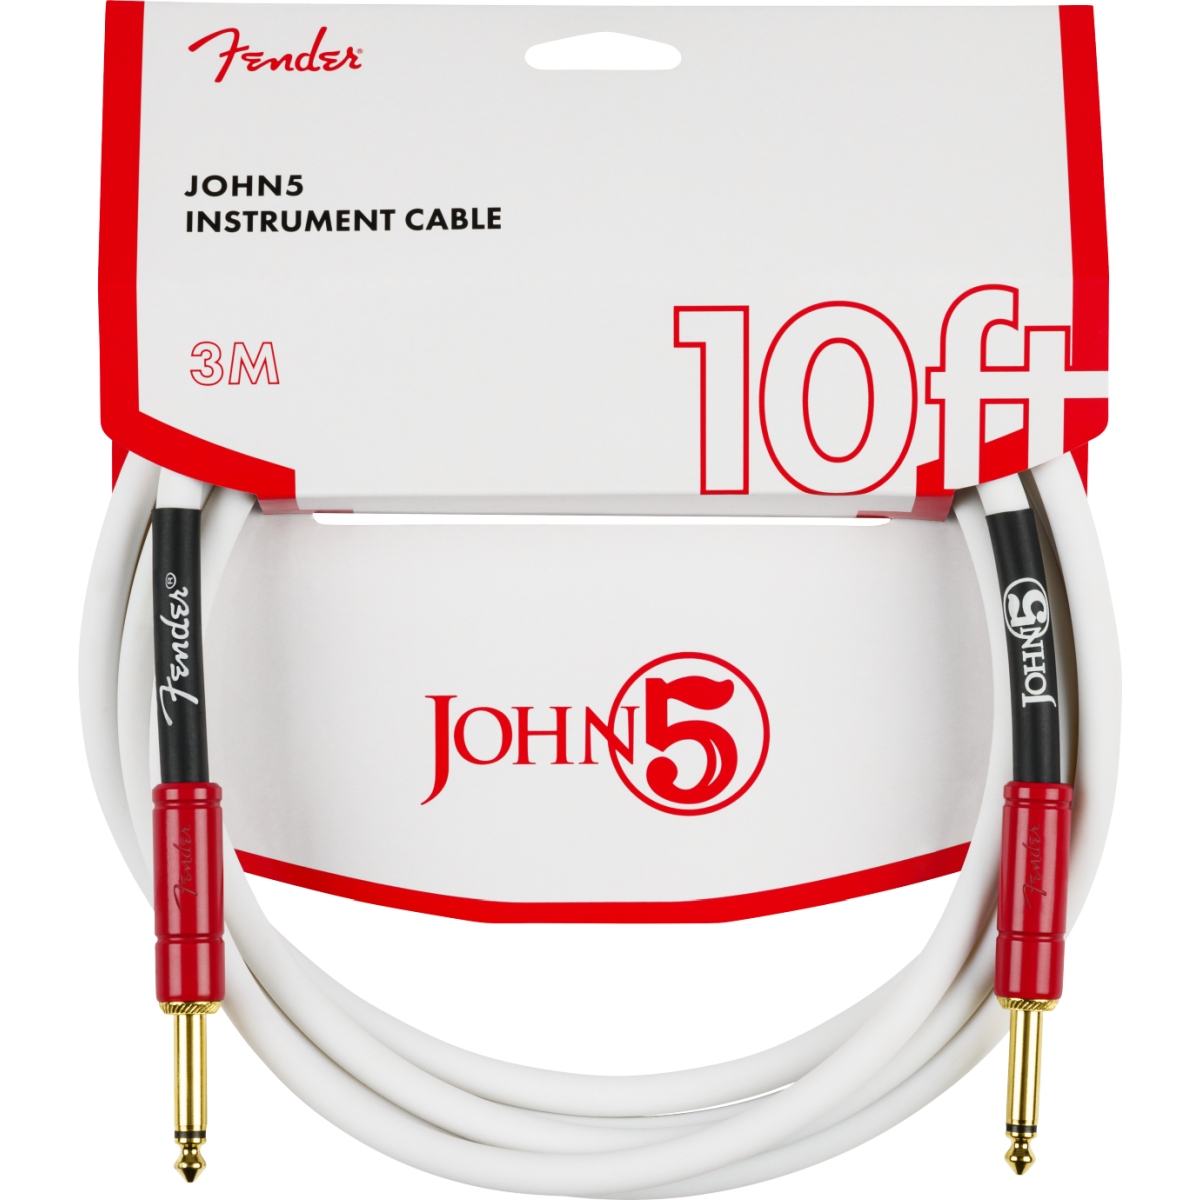 Fender / John 5 10 Feet Instrument Cable White/Red [ギターケーブル][約3ｍ]